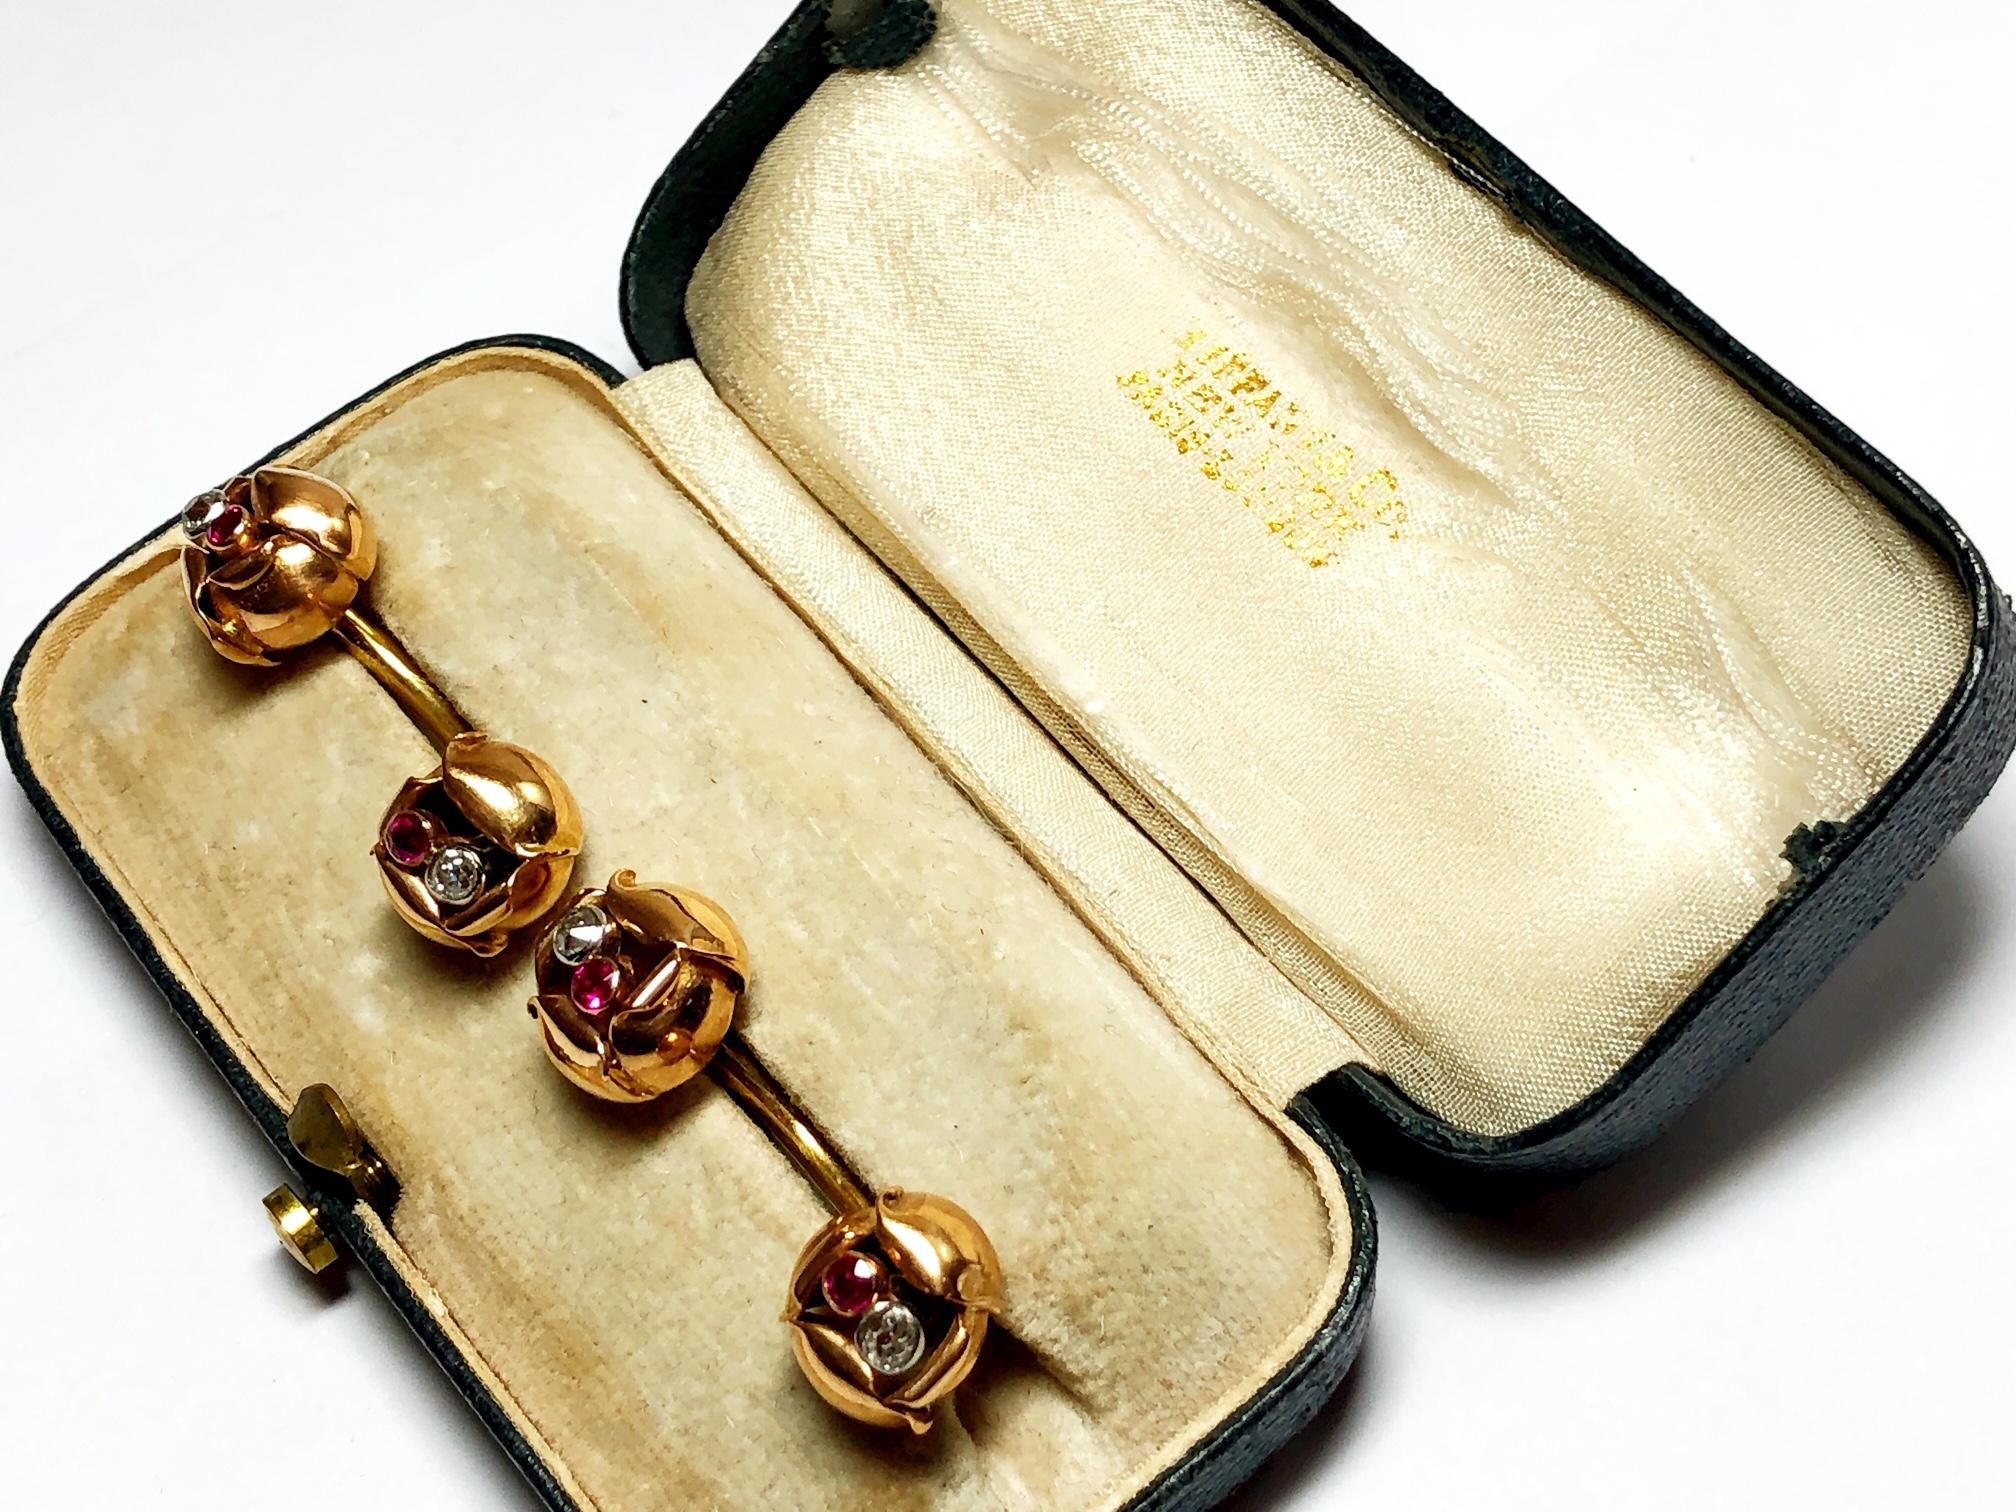 A pair of vintage Tiffany & Co. cufflinks, set with a flower to each end, connected by a curved bar link, each flower is set with a round cut ruby and old cut diamond, mounted in 18ct yellow gold, signed by Tiffany & Co, circa 1940's.